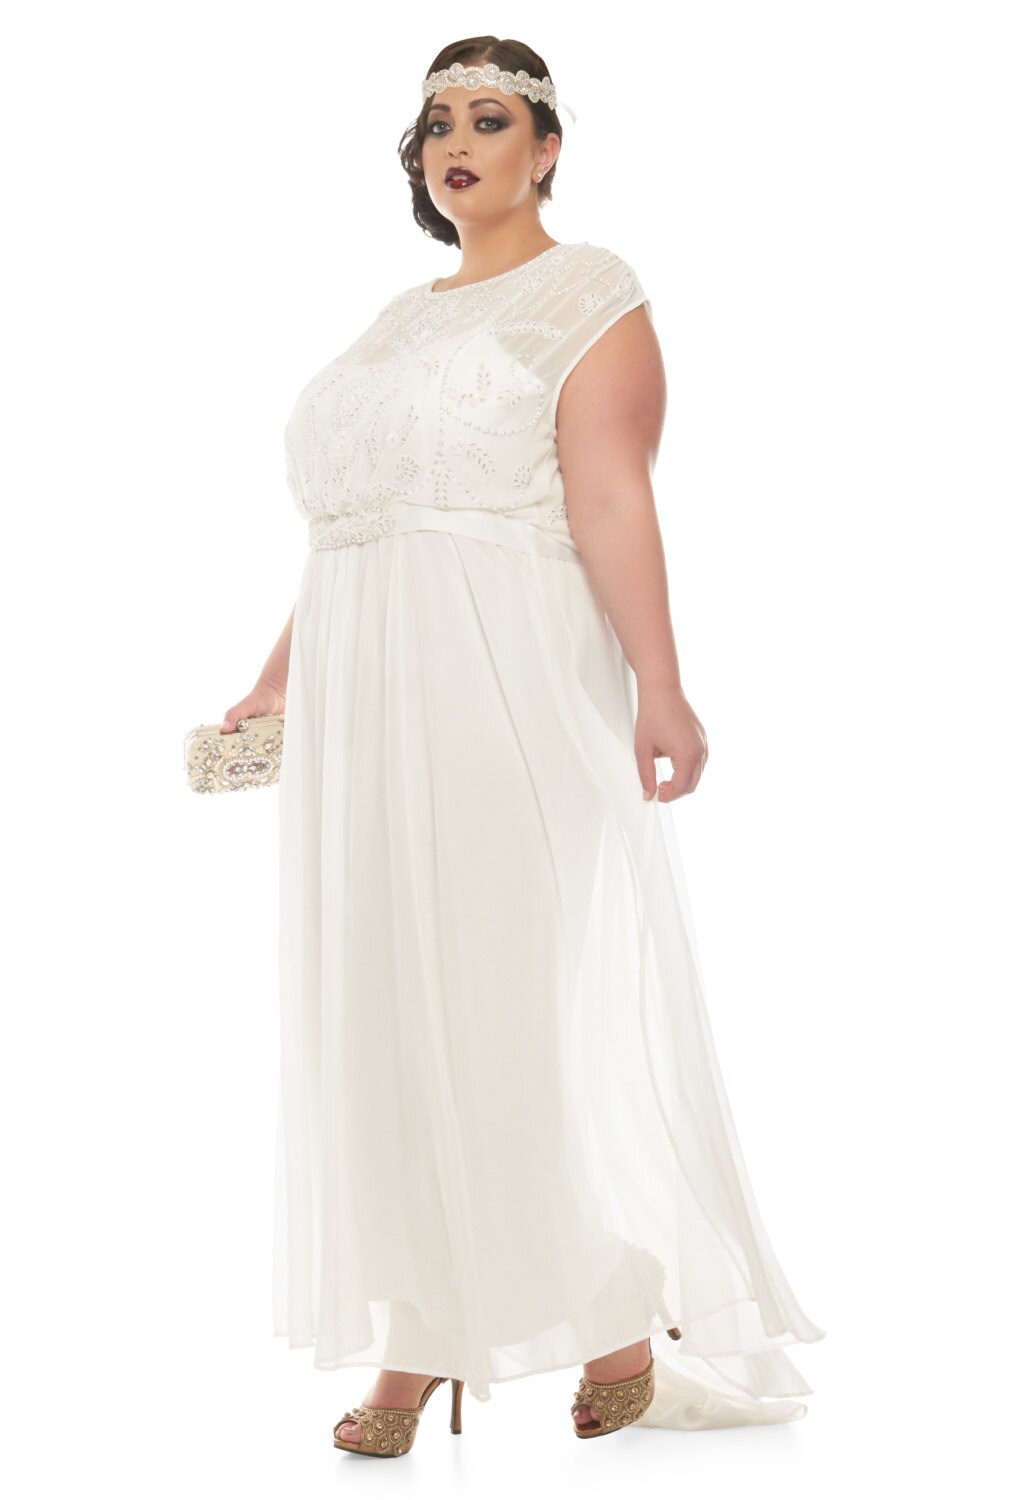 Plus size dresses to wear to a fall wedding money down